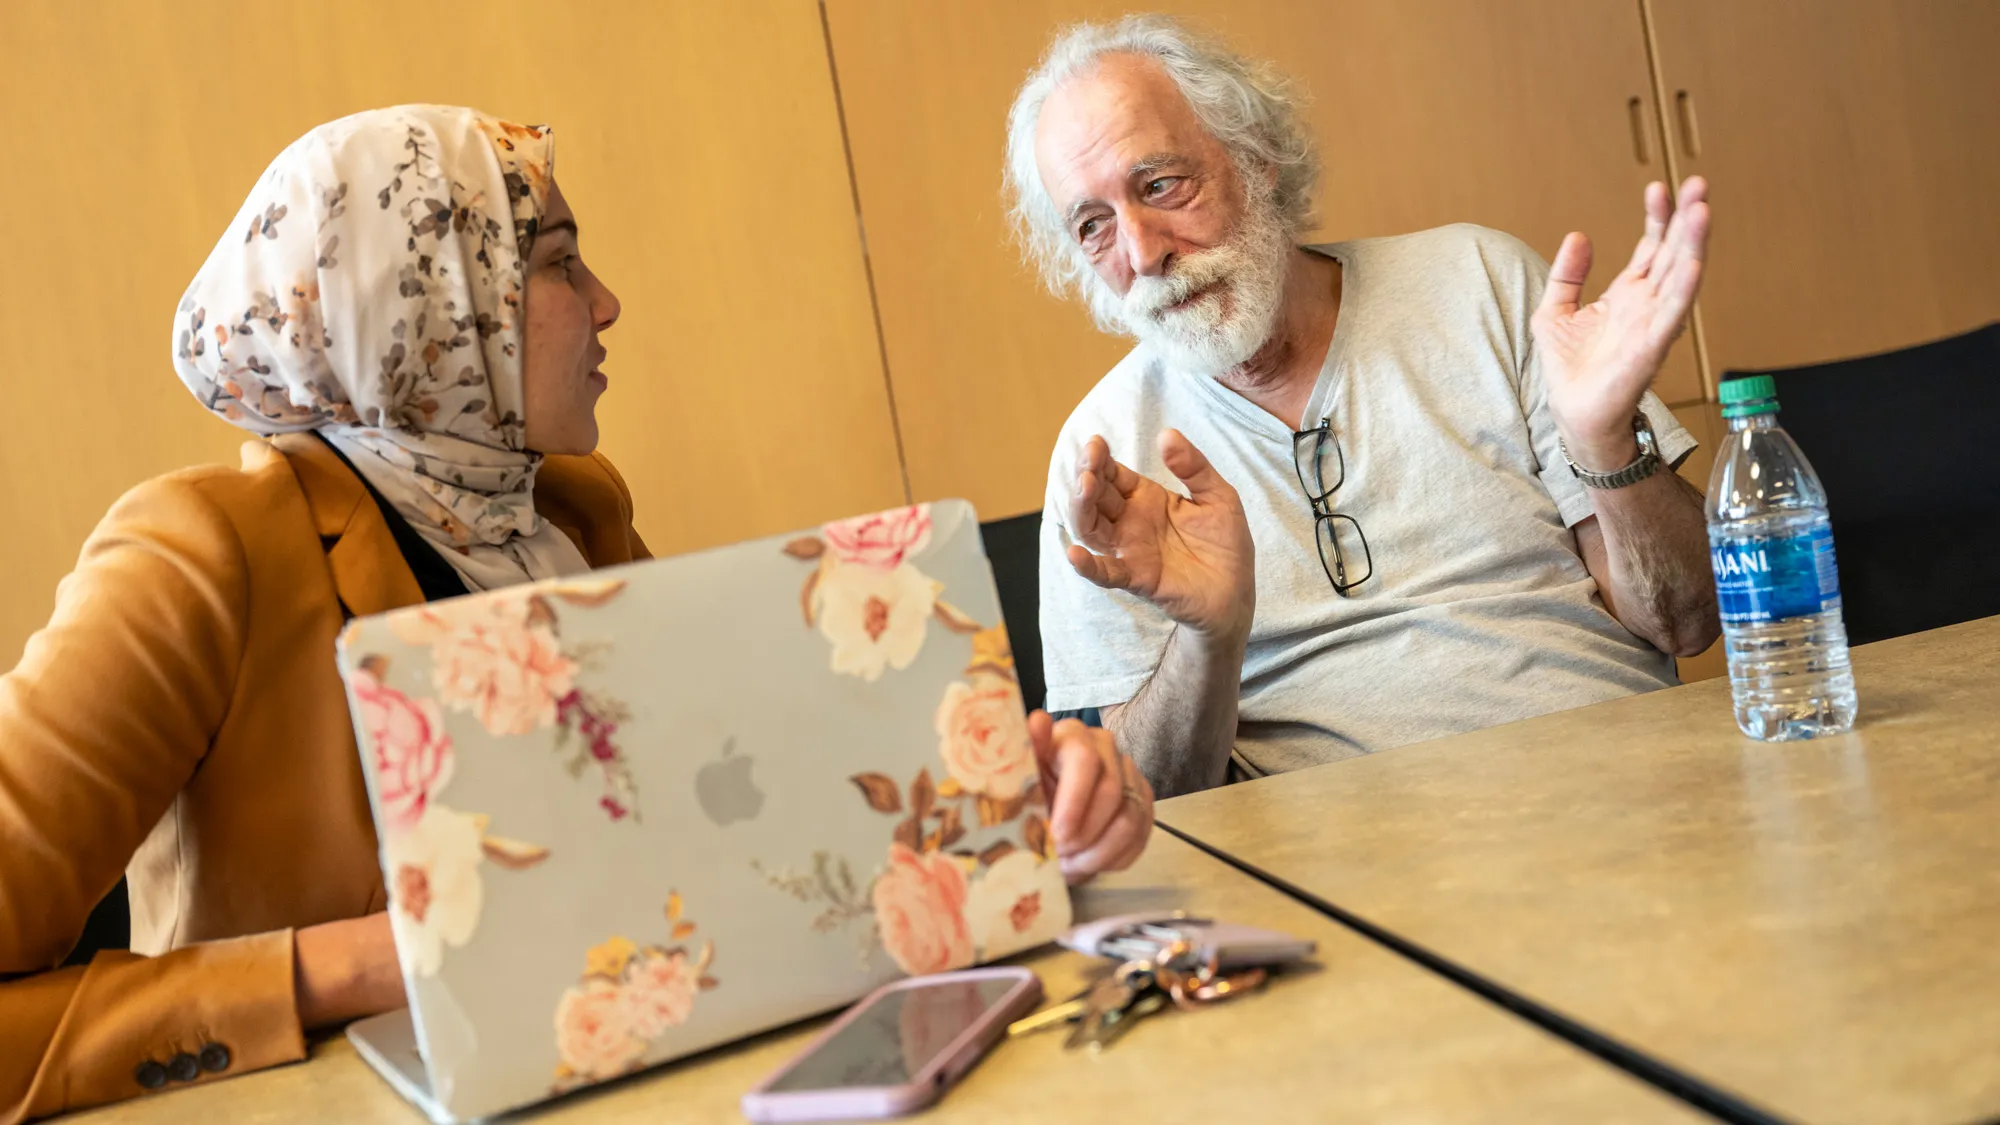 A student wearing a floral-print headscarf and suit jacket listens as Agostini, in a T-shirt, looks her in the eyes as he answers her strong-field physics question. She’s a member of his research group and is originally from the Middle East.  On the conference table in front of them are his bottle of water and her laptop, cellphone and keys. 